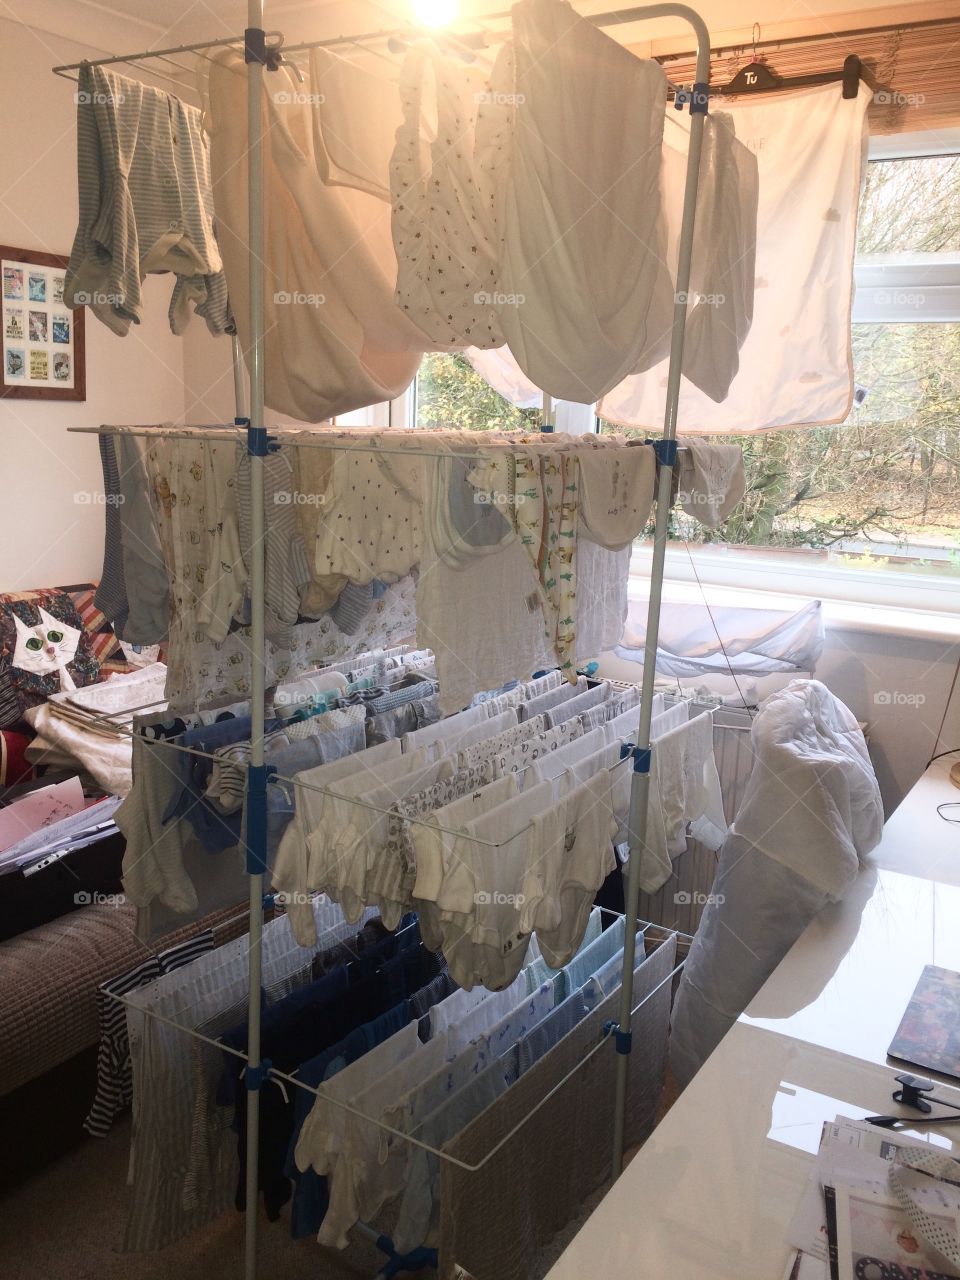 Ridiculous amount of baby clothes laundry washing line